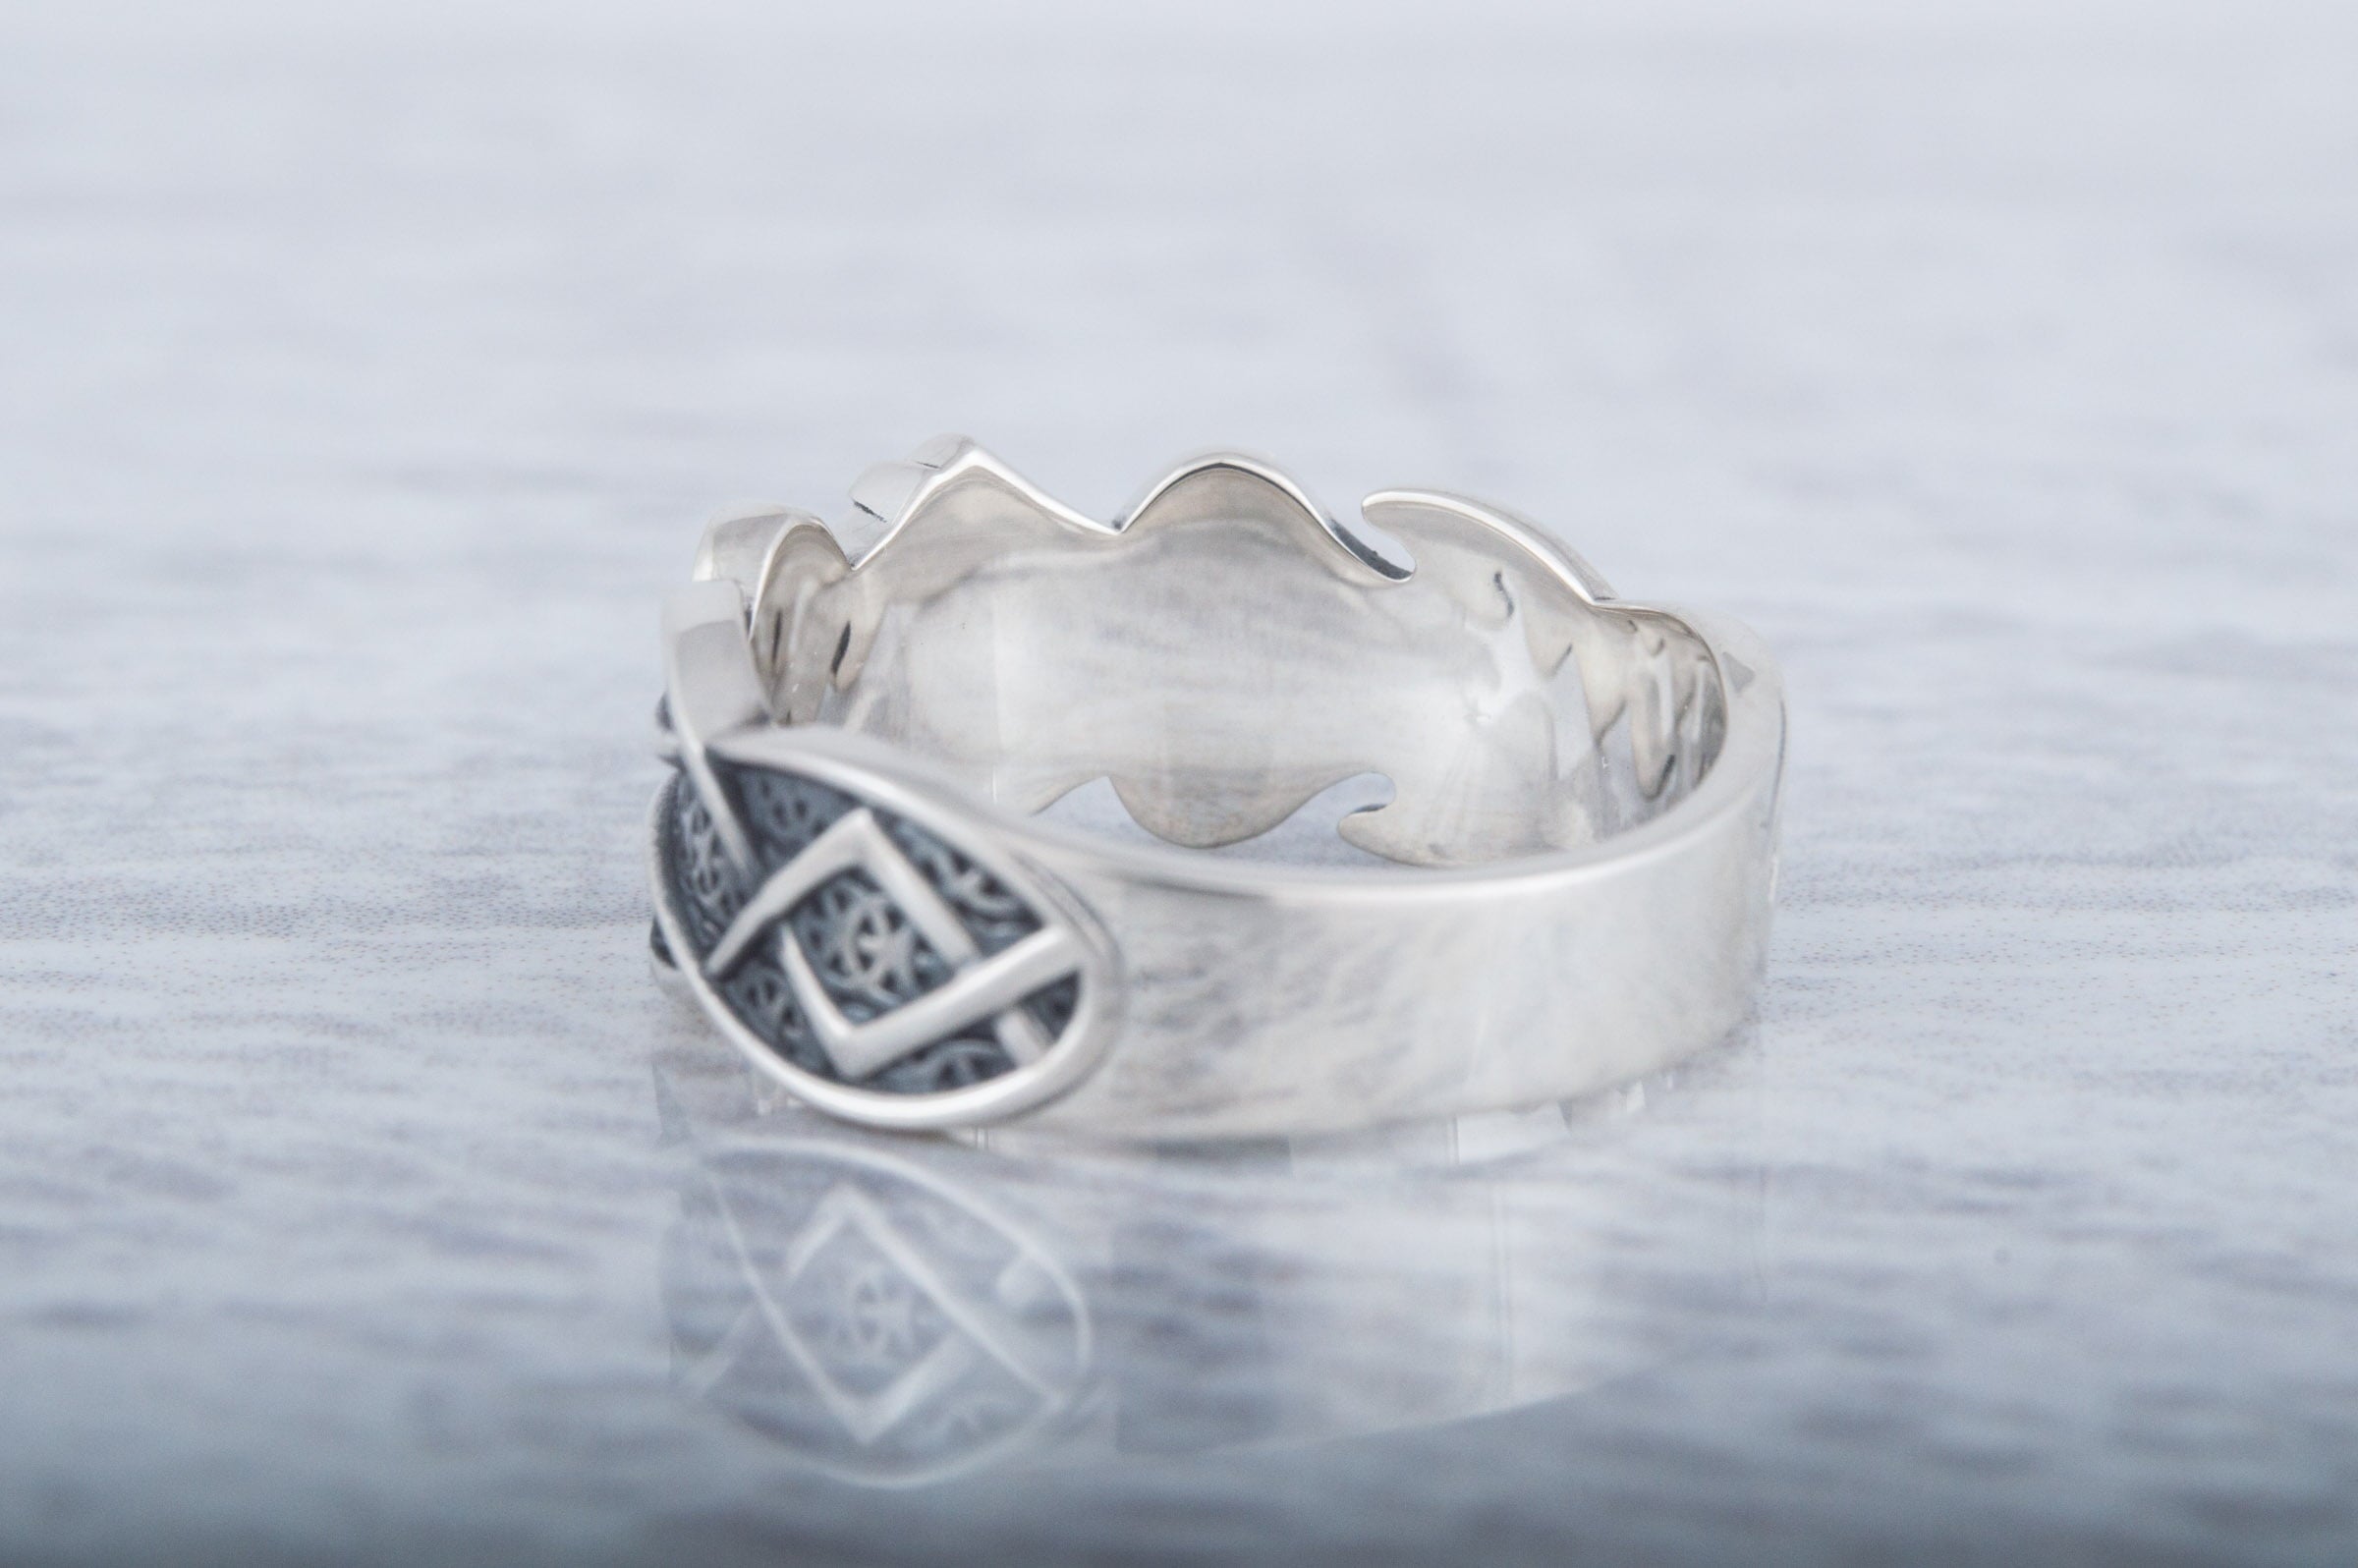 Ring with Sowelu Rune and Norse Ornament Sterling Silver Viking Jewelry - vikingworkshop